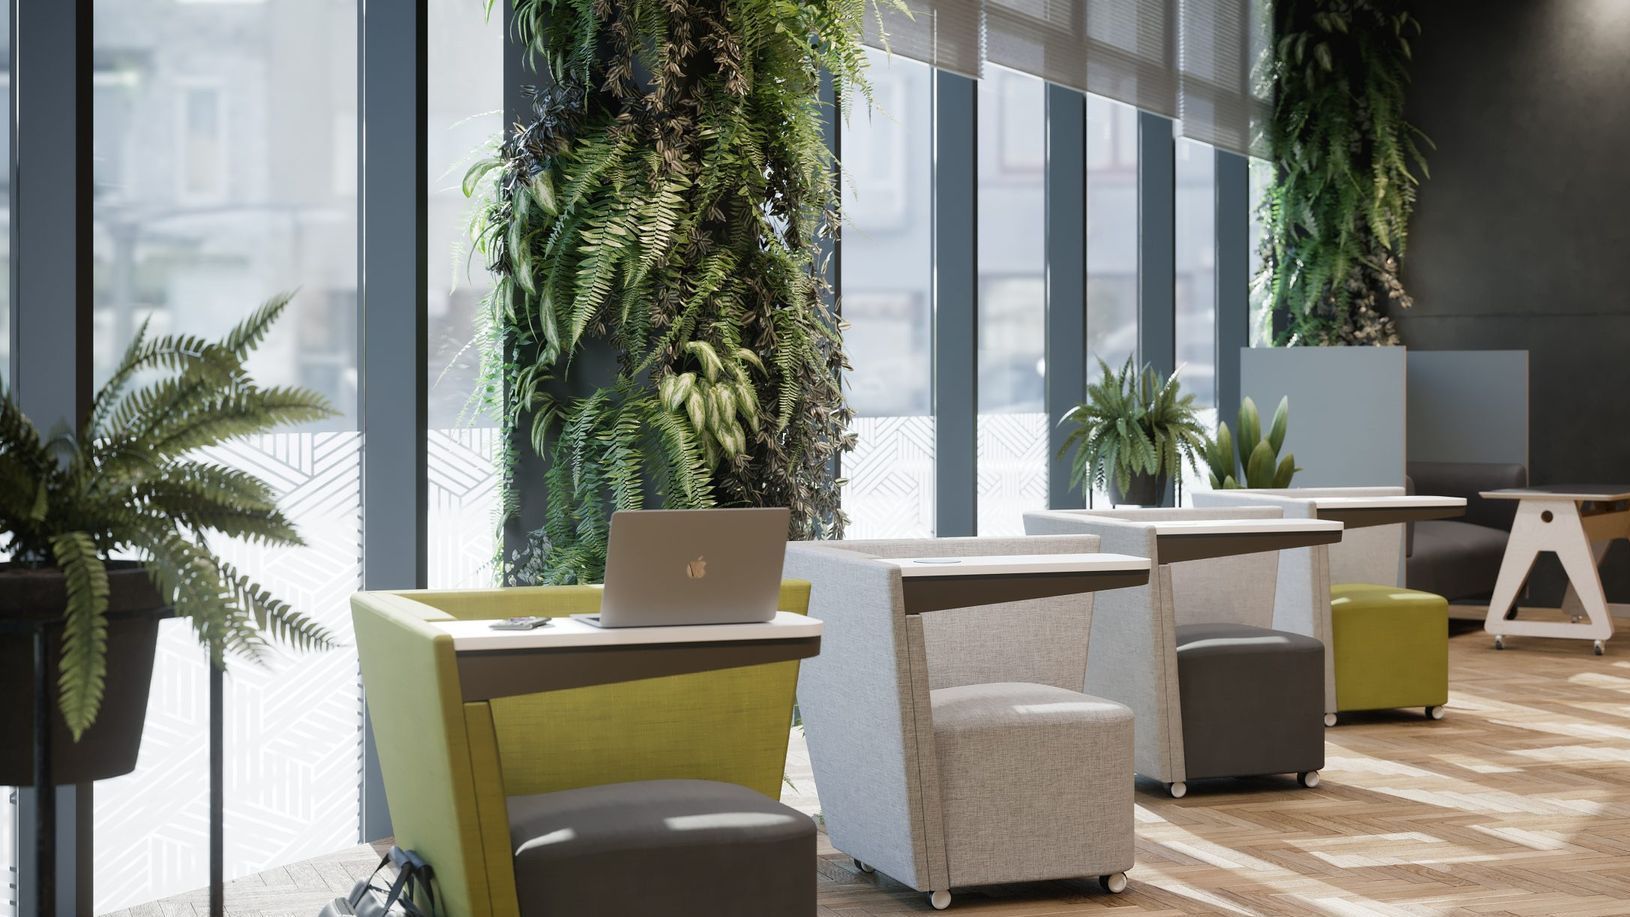 the photo features a window wall in an office. there are individual seating along the windows, each with a personal desk. on the front desk is a laptop. behind the desks are thriving greenery going up the walls and a few plants. 